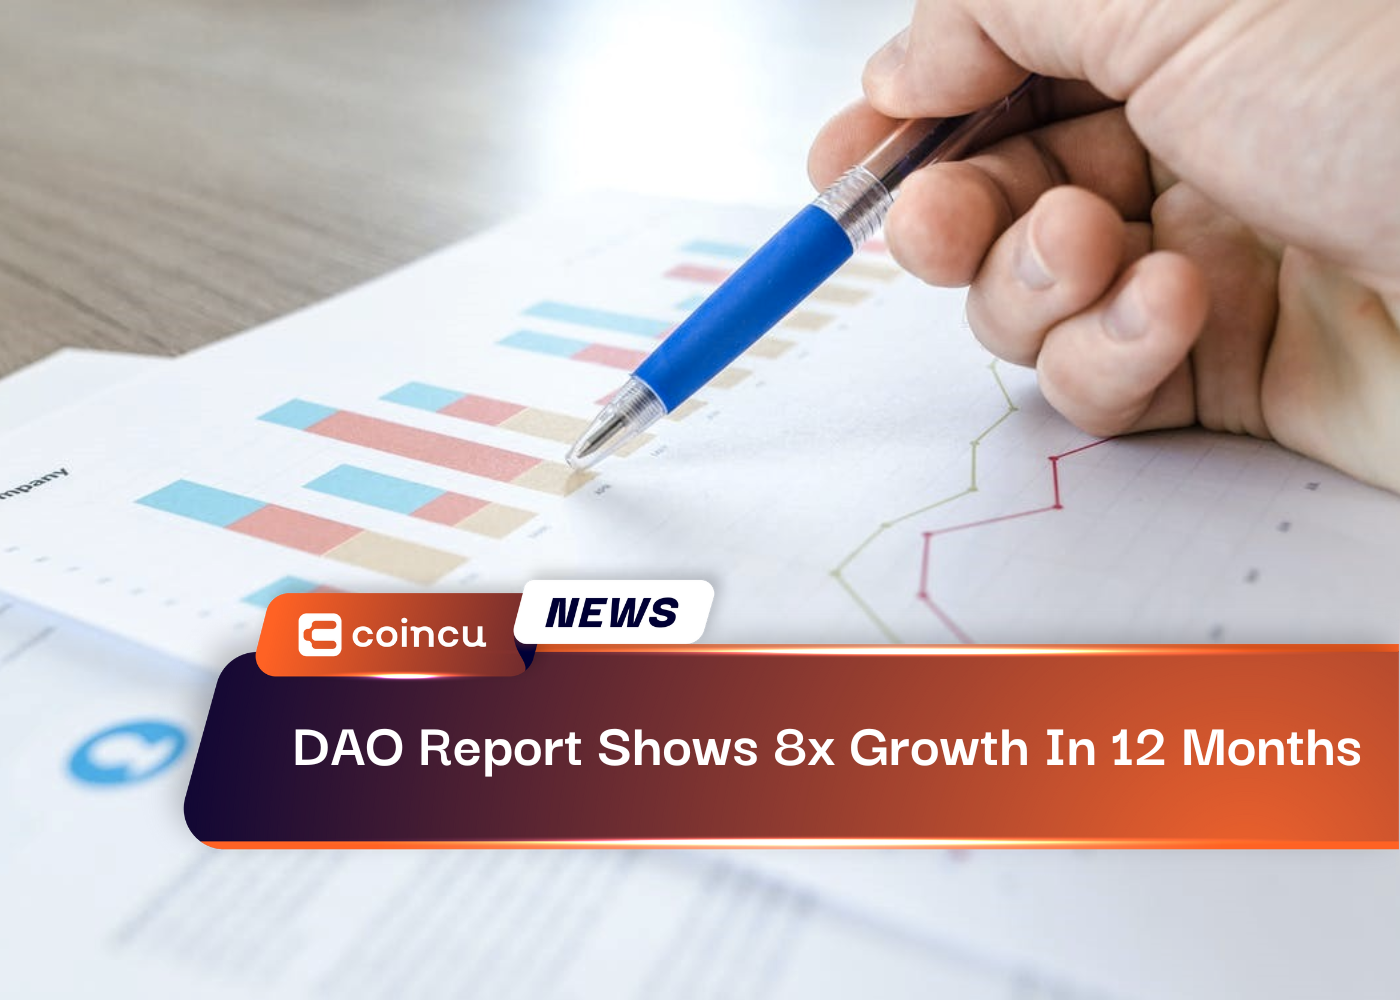 DAO Report Shows 8x Growth In 12 Months